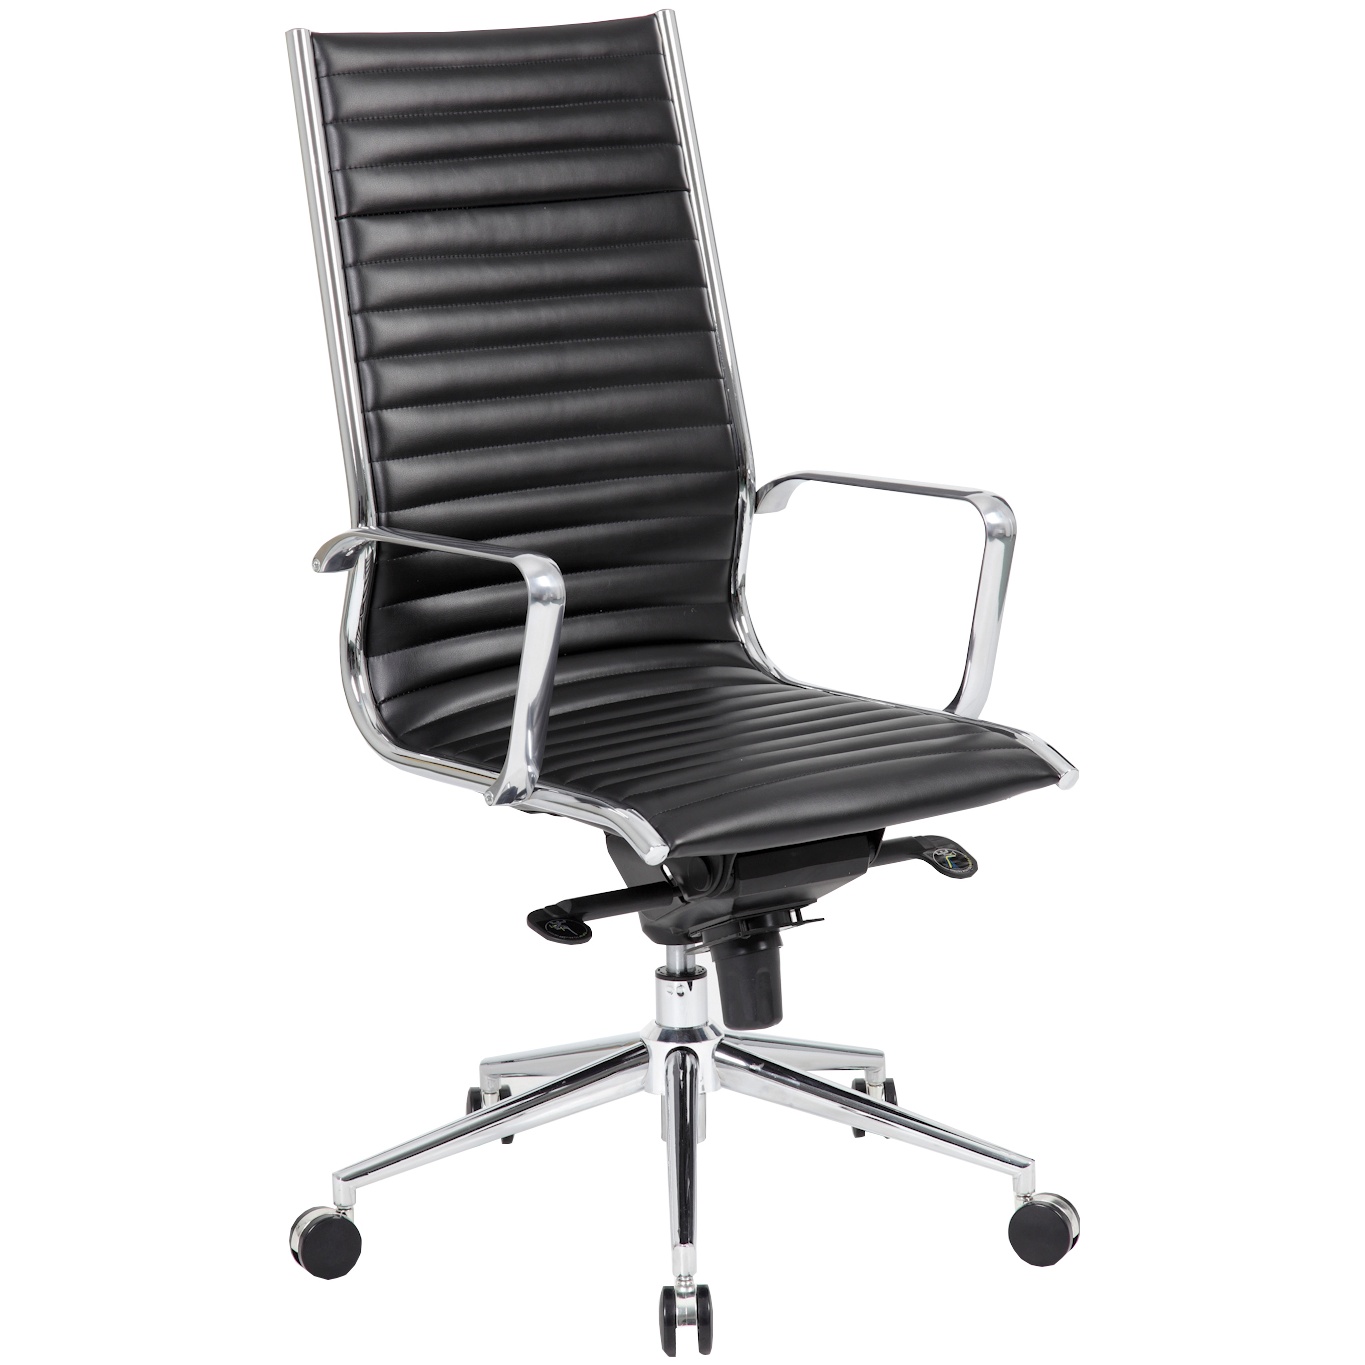 Abbey High Back Leather Office Chairs, Executive High Back Leather Office Chair